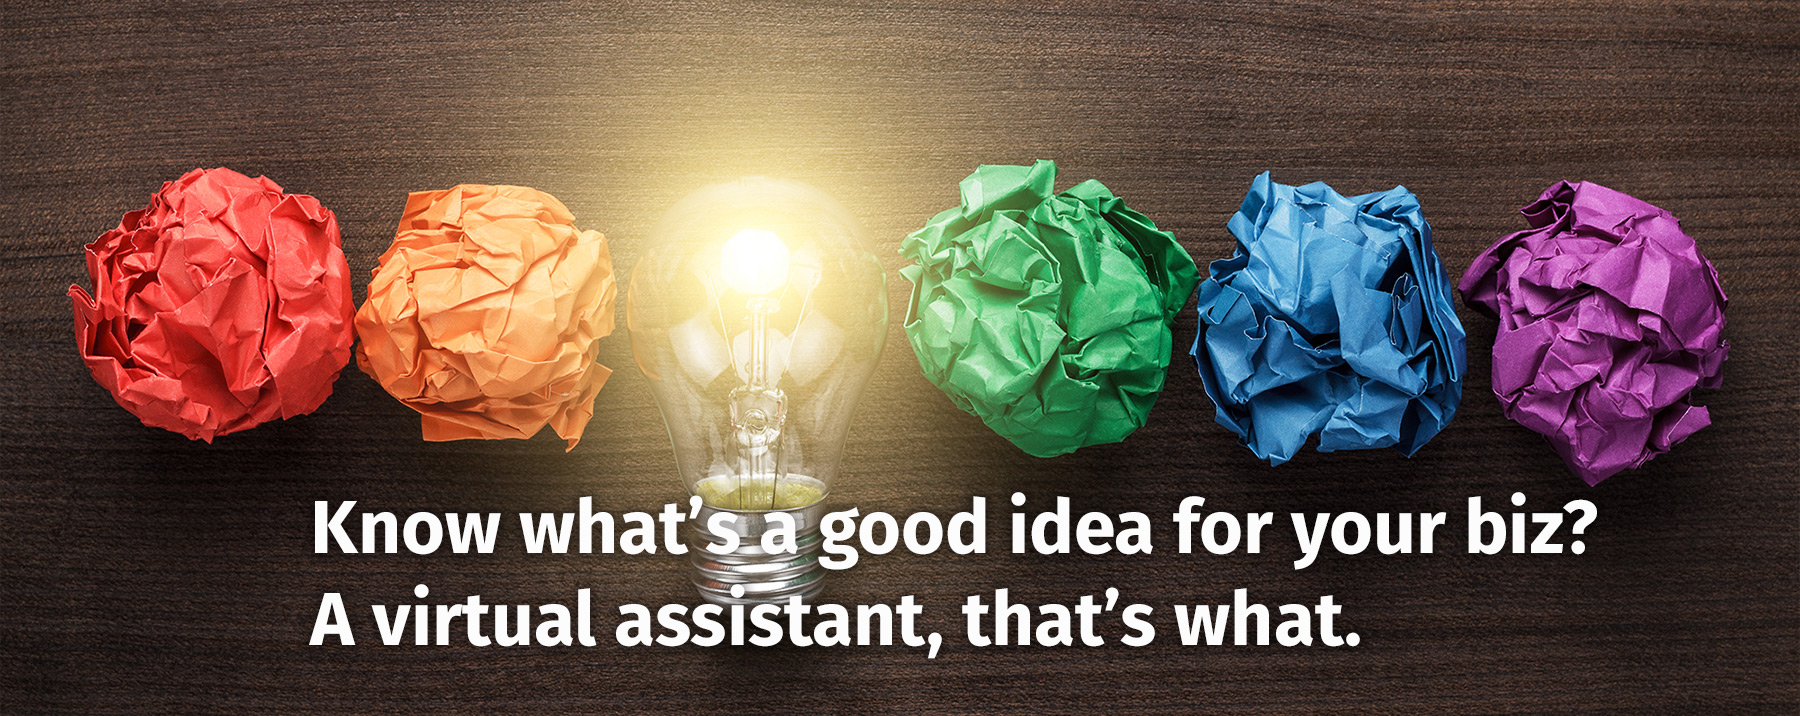 Know what's a good idea for your biz? A virtual assistant, that's what.